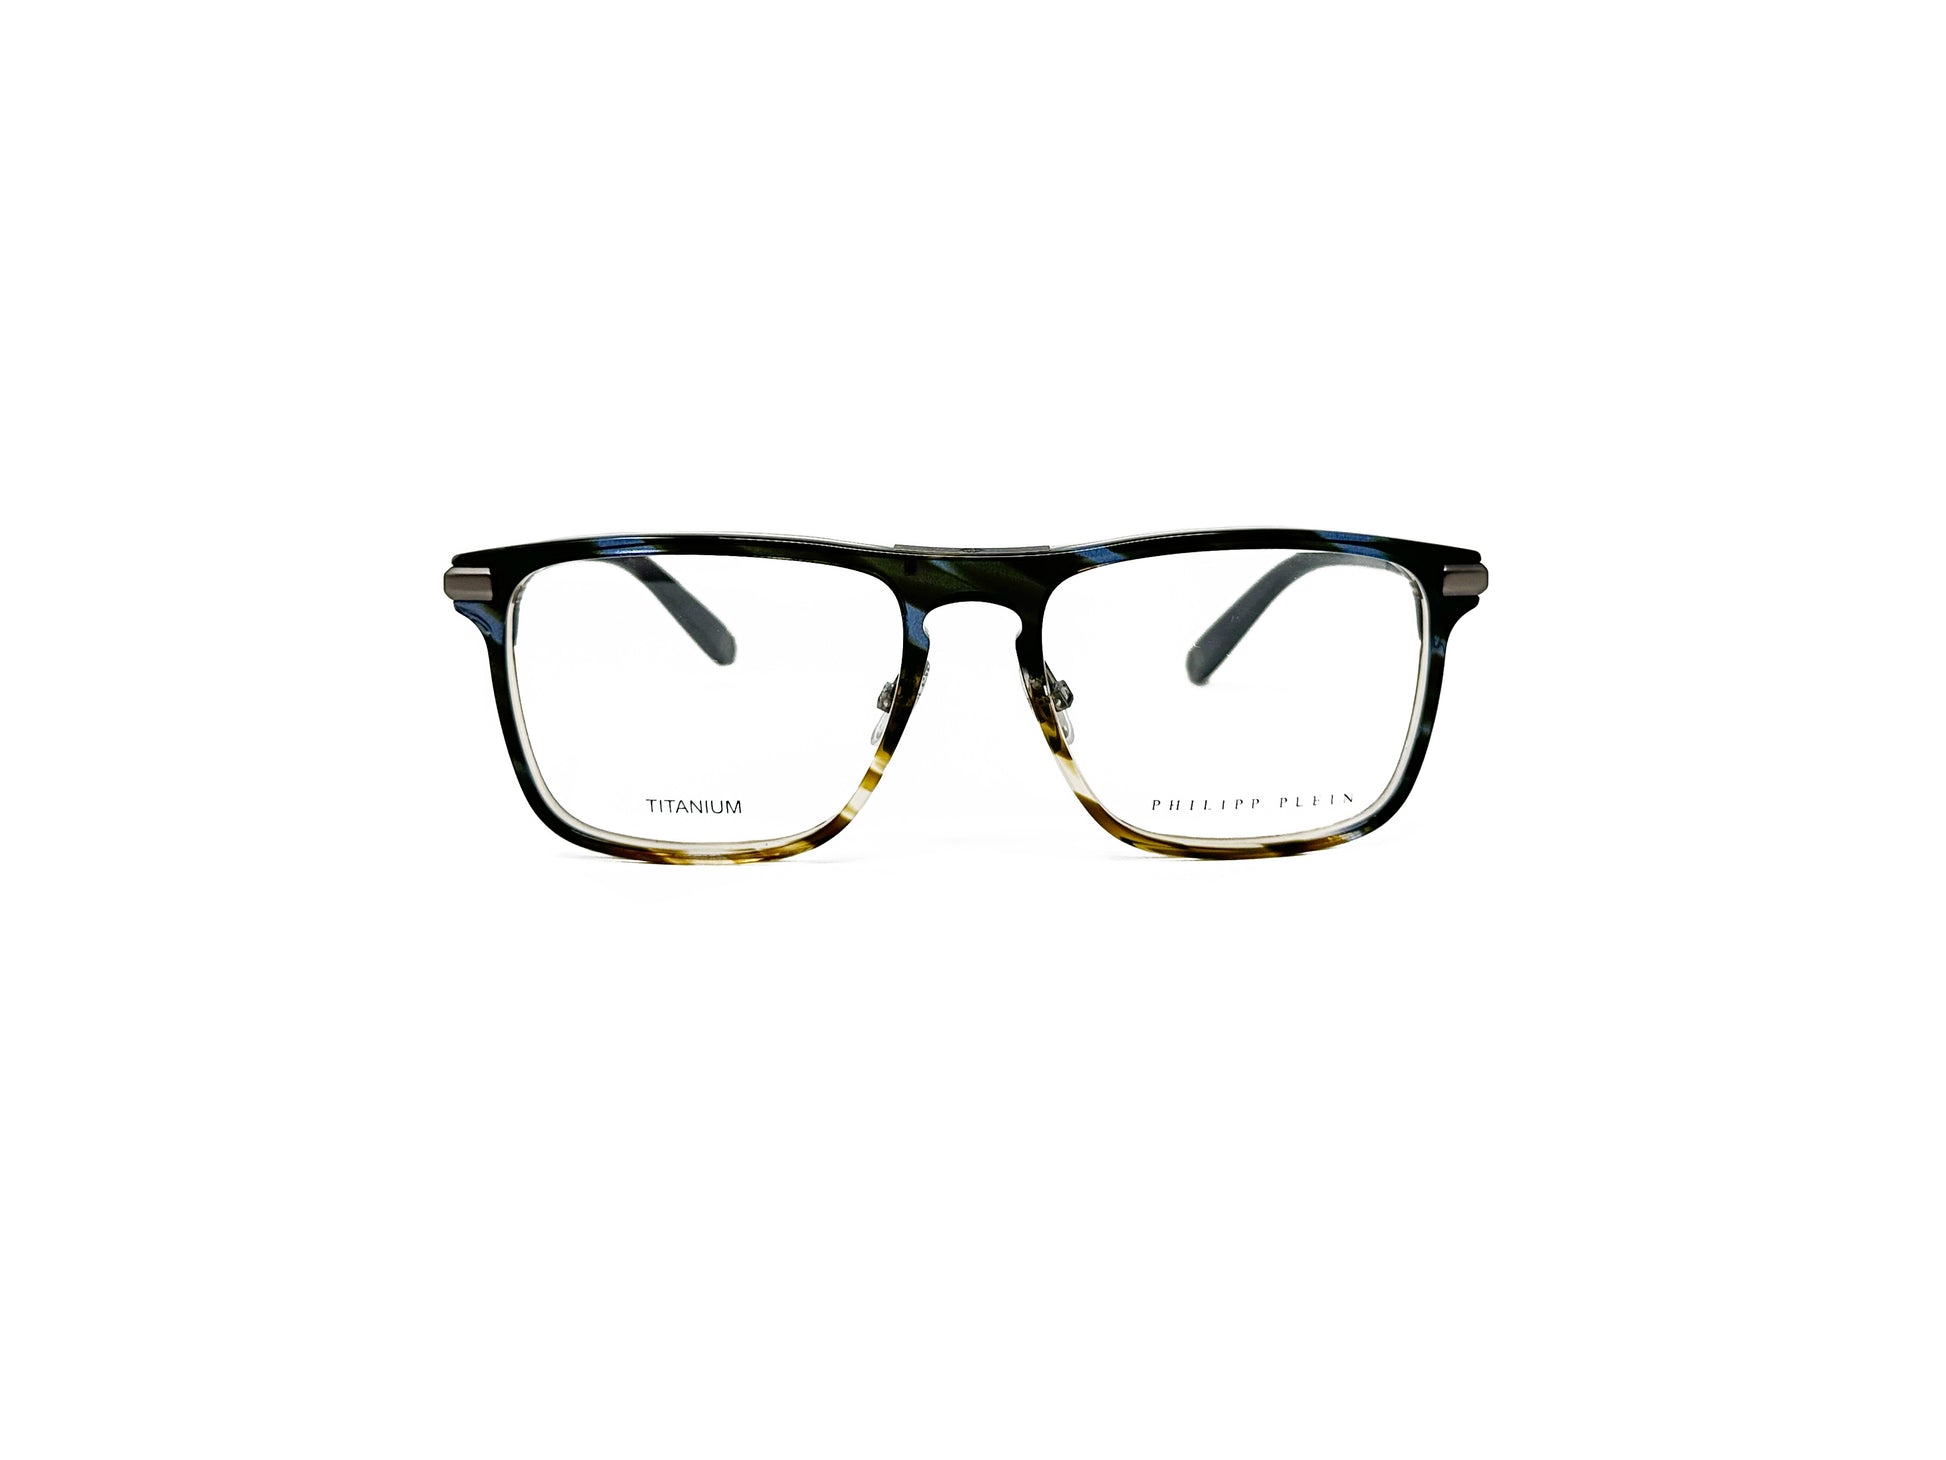 Philipp Plein rectangular acetate optical frame with keyhole bridge. Model: VPP019 First Love. Color: 09N3 Brown and blue. front view. 